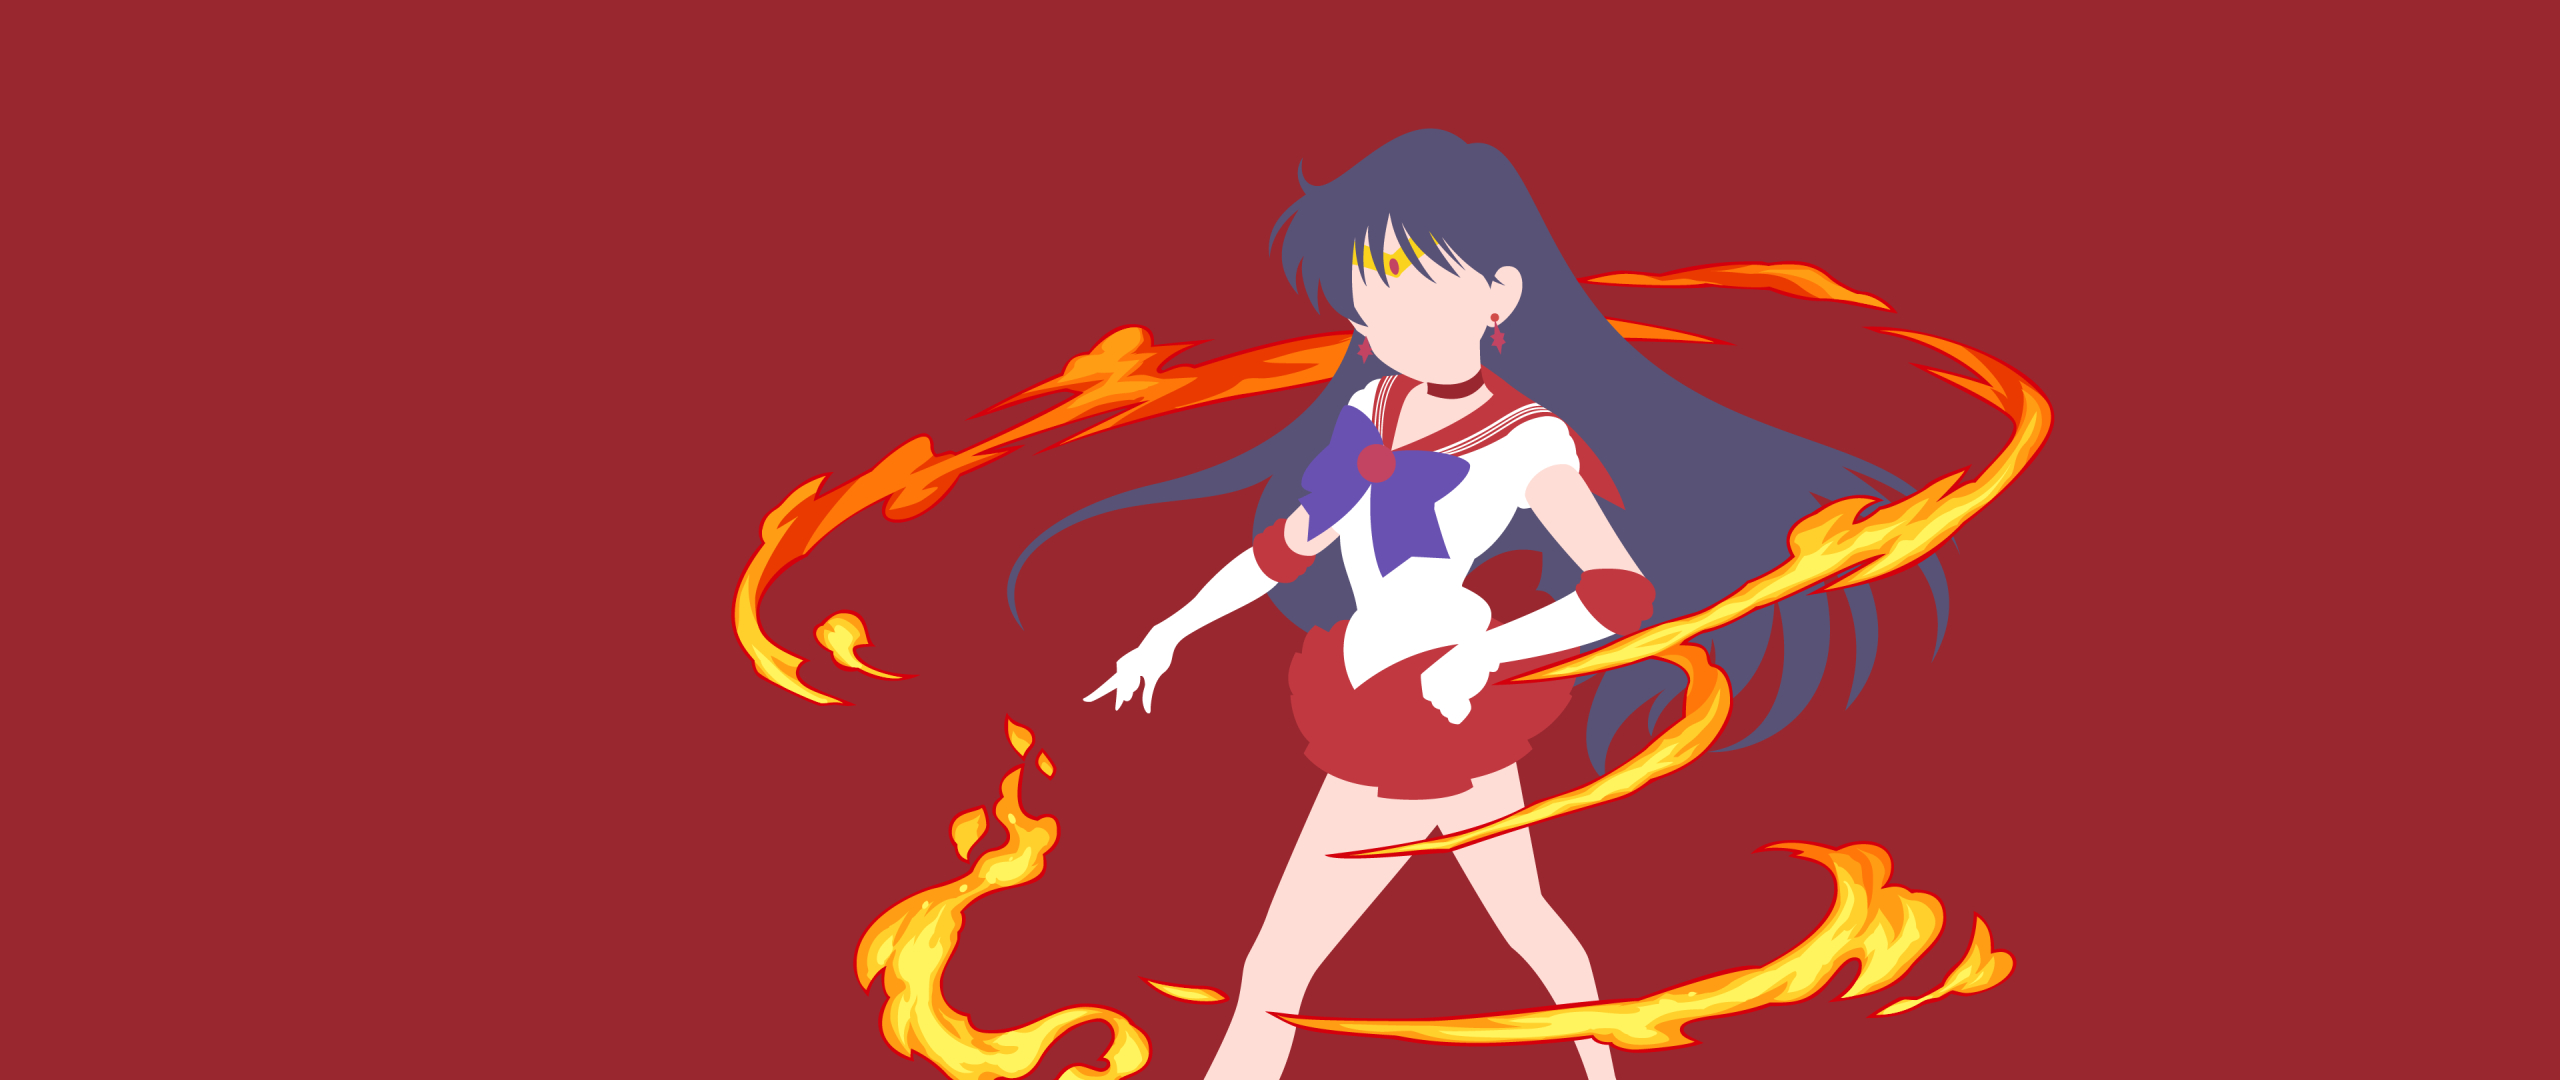 2560x1080 Sailor Moon Minimal 2560x1080 Resolution Wallpaper Hd Minimalist 4k Wallpapers Images Photos And Background Collection by annie strus • last updated 2 weeks ago. 2560x1080 sailor moon minimal 2560x1080